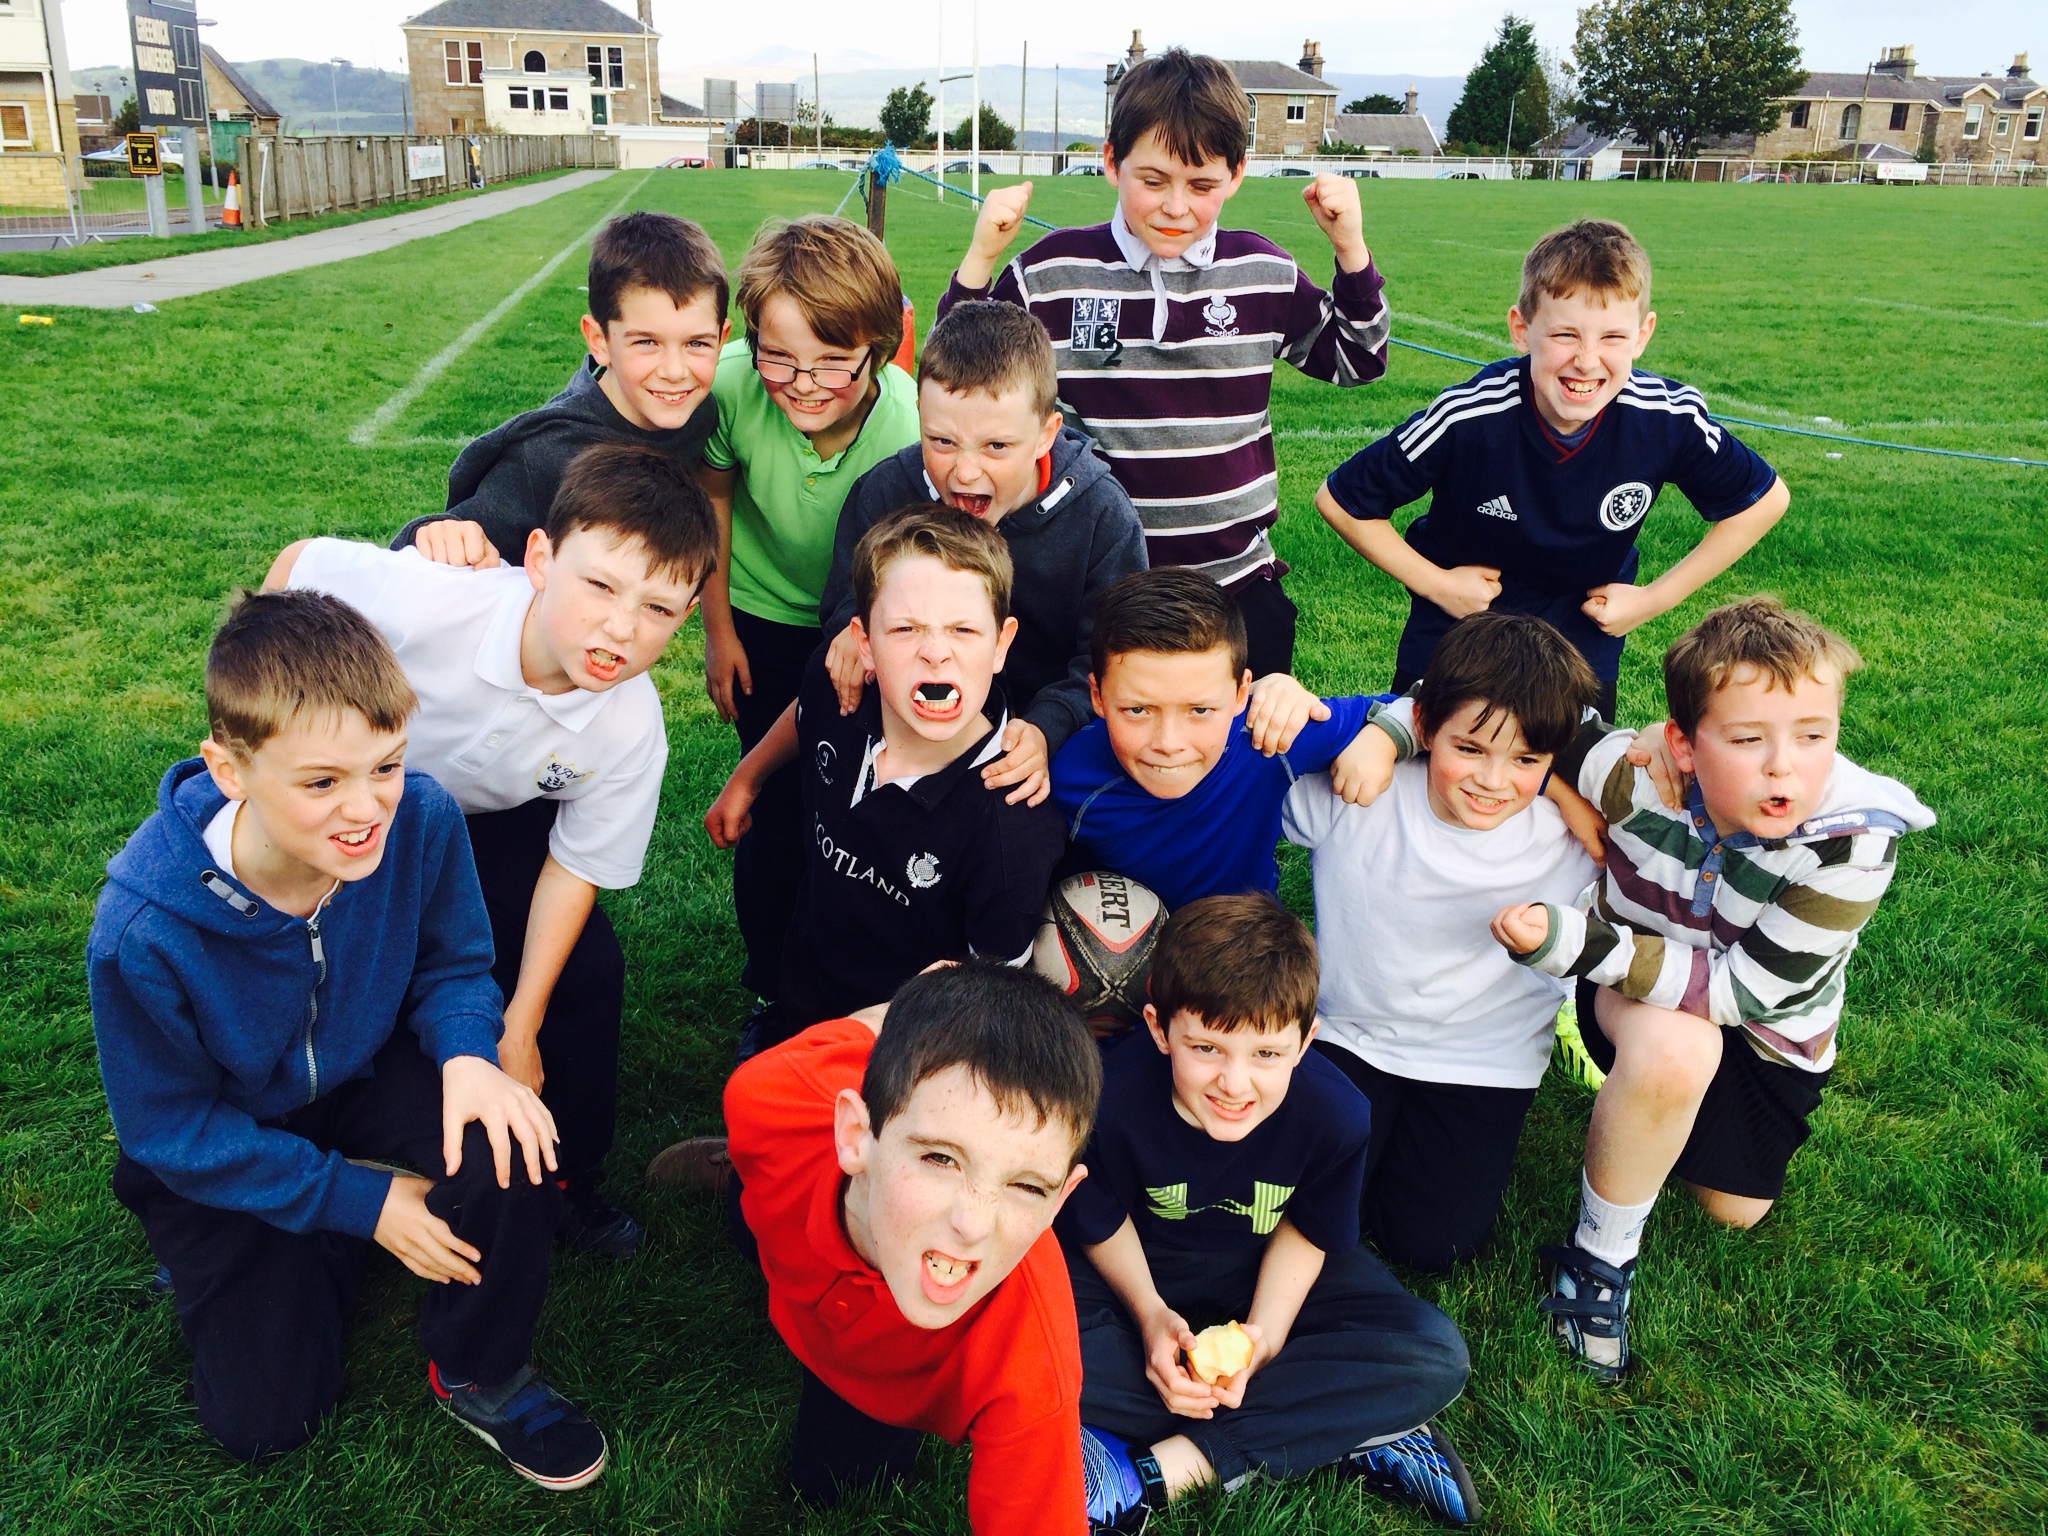 The boys showing off their Rugby faces!